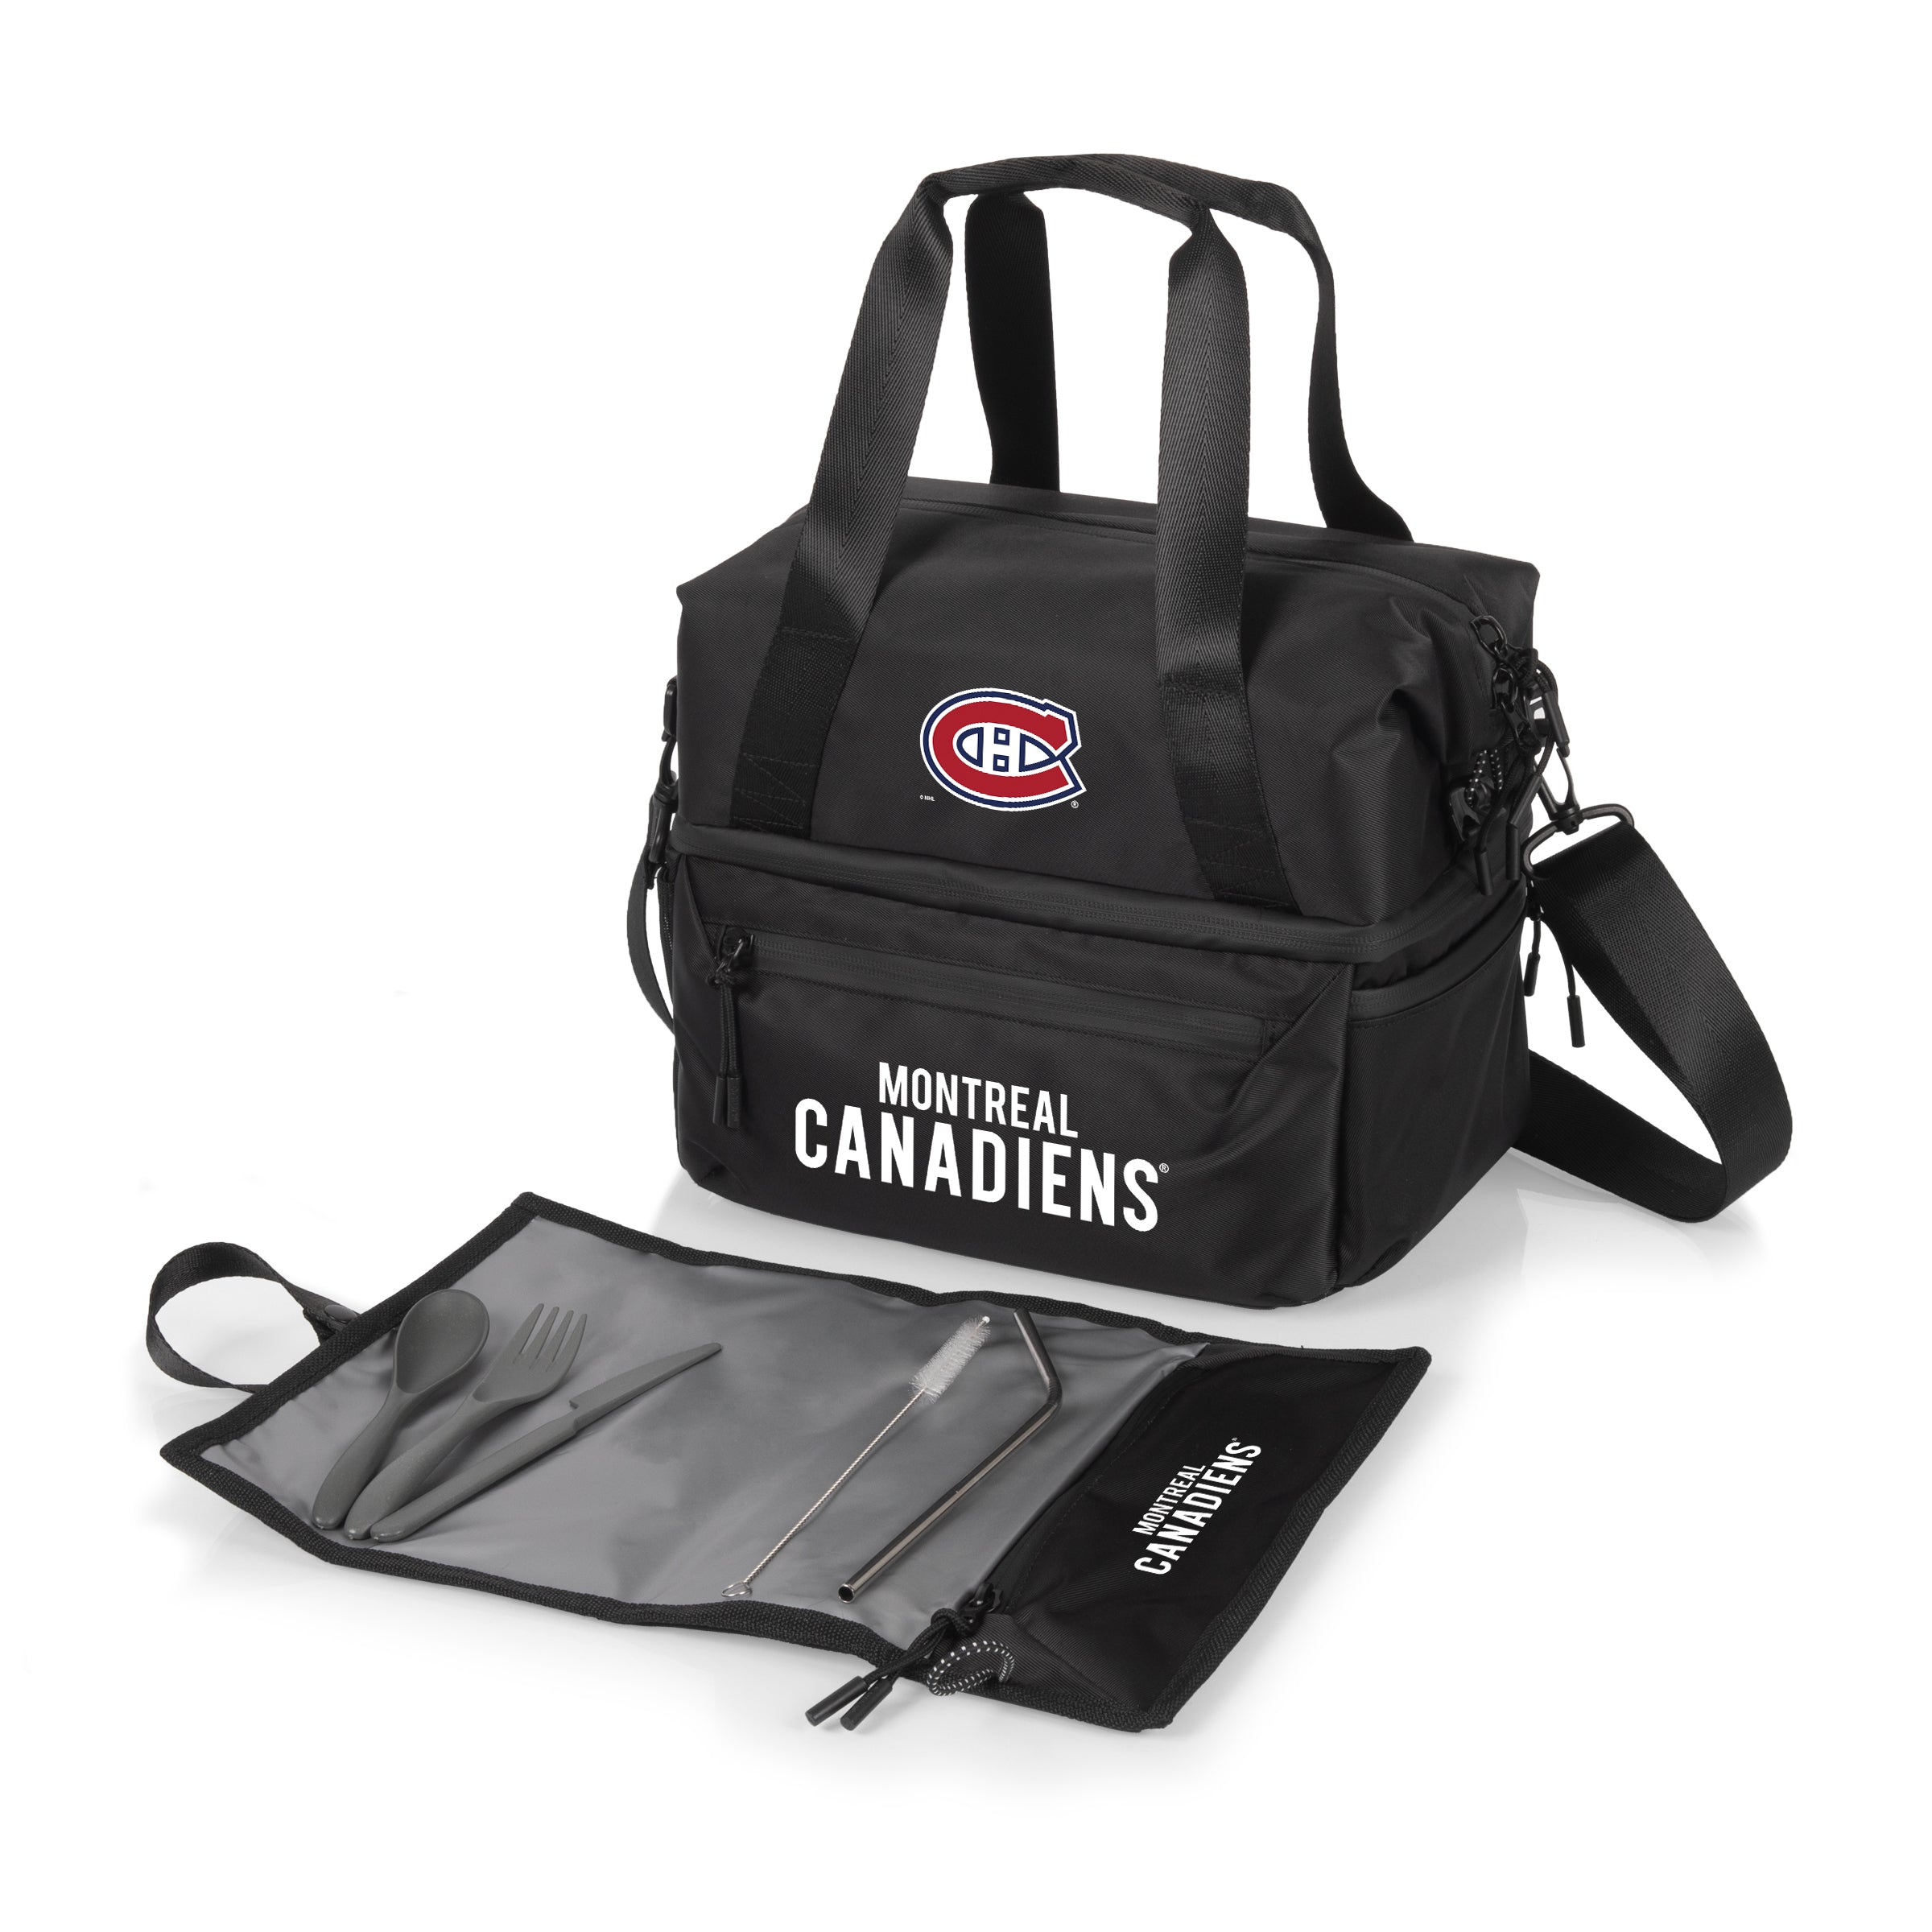 Montreal Canadiens - Tarana Lunch Bag Cooler with Utensils